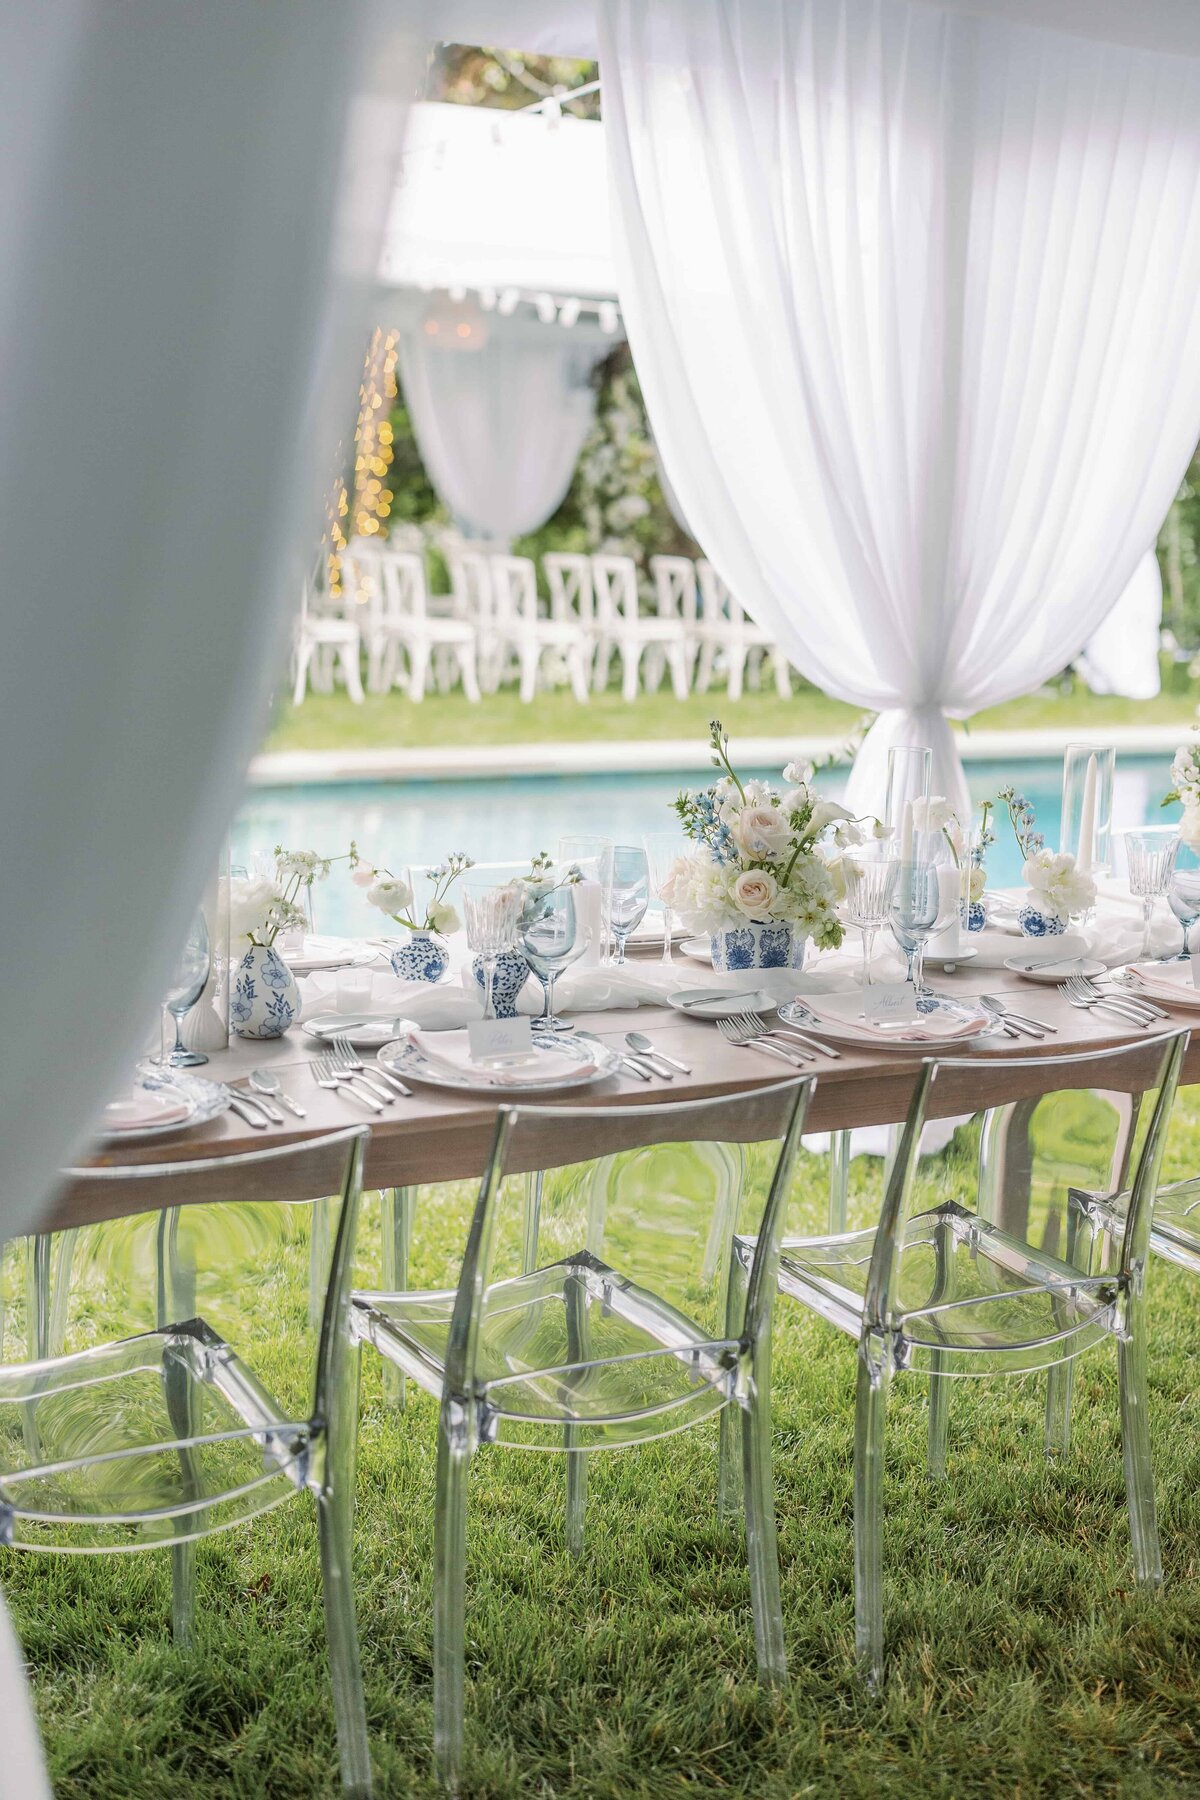 Luxury Estate Tent Wedding New England - Cru and Co Events